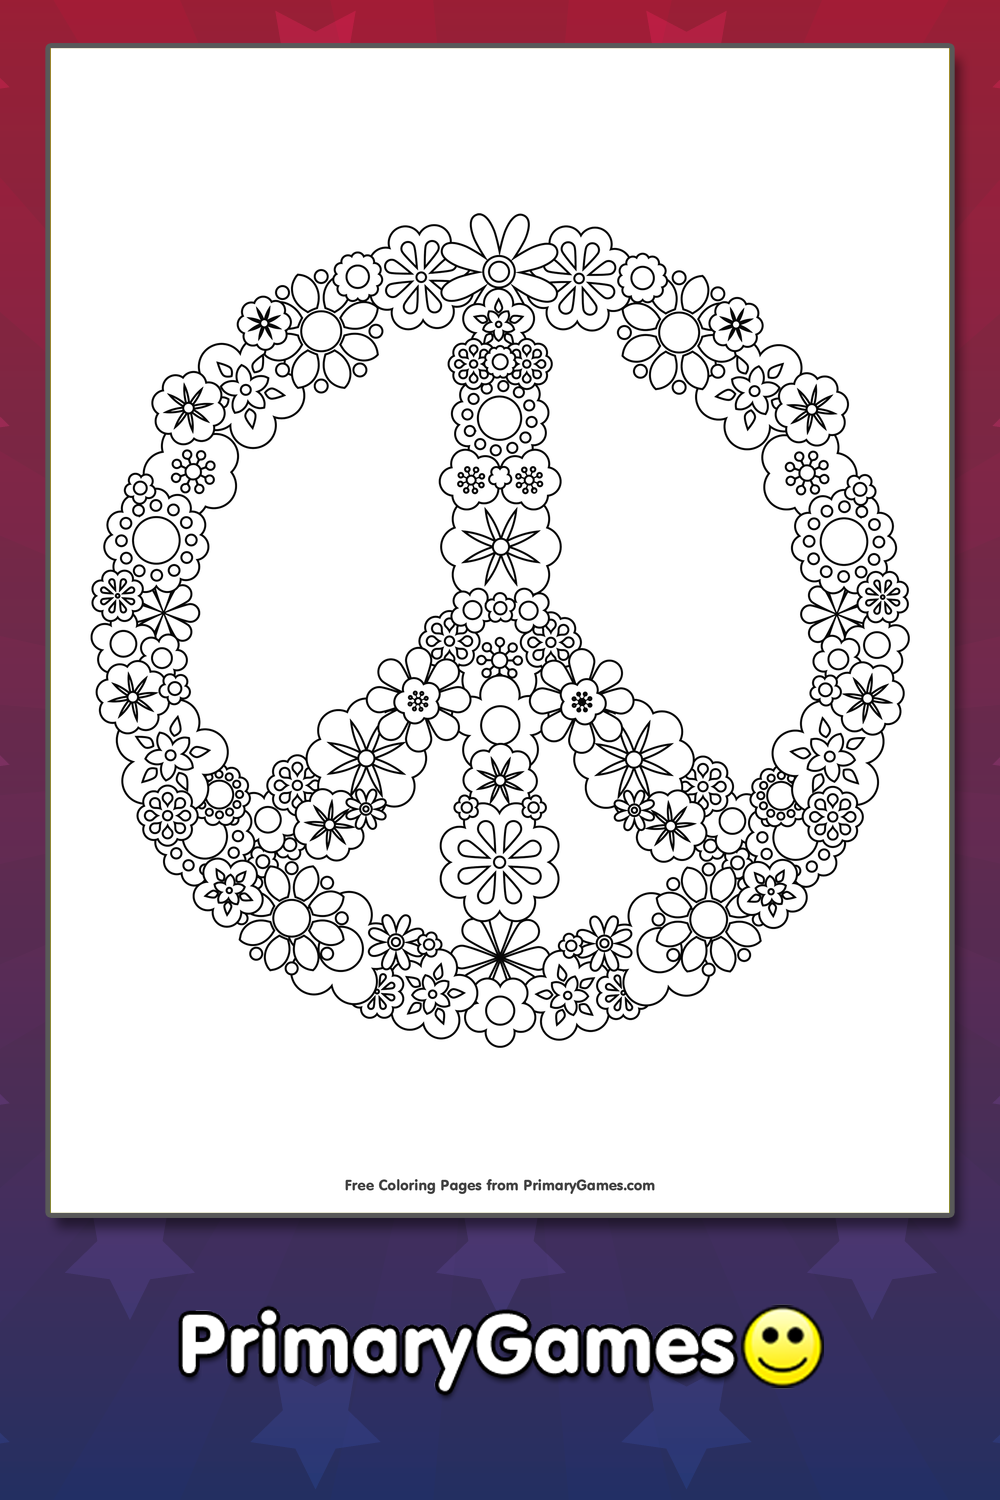 Peace sign made of flowers coloring page â free printable pdf from